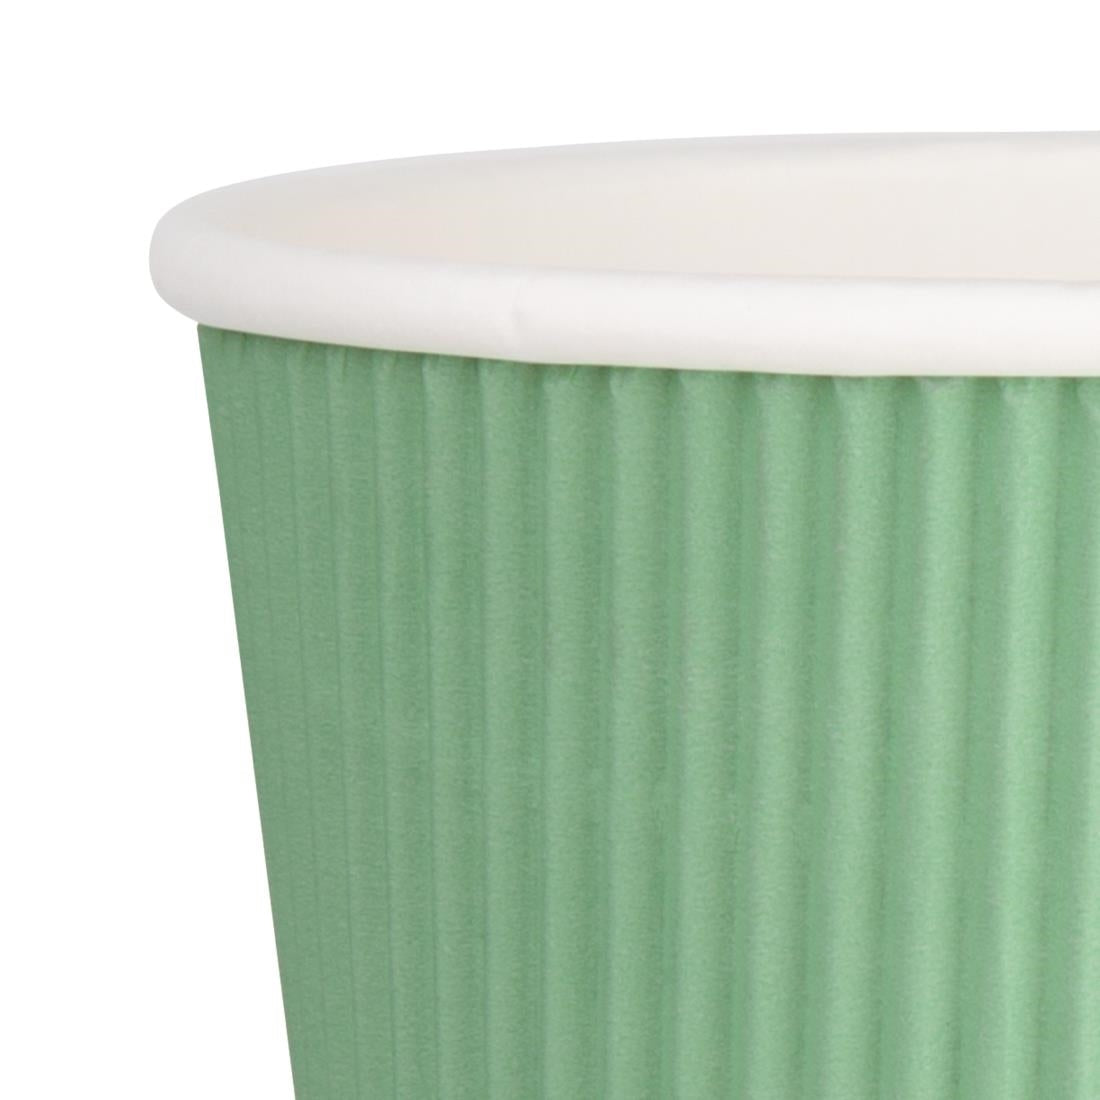 GP421 Fiesta Ripple Wall Takeaway Coffee Cups Turquoise 225ml / 8oz (Pack of 500) JD Catering Equipment Solutions Ltd